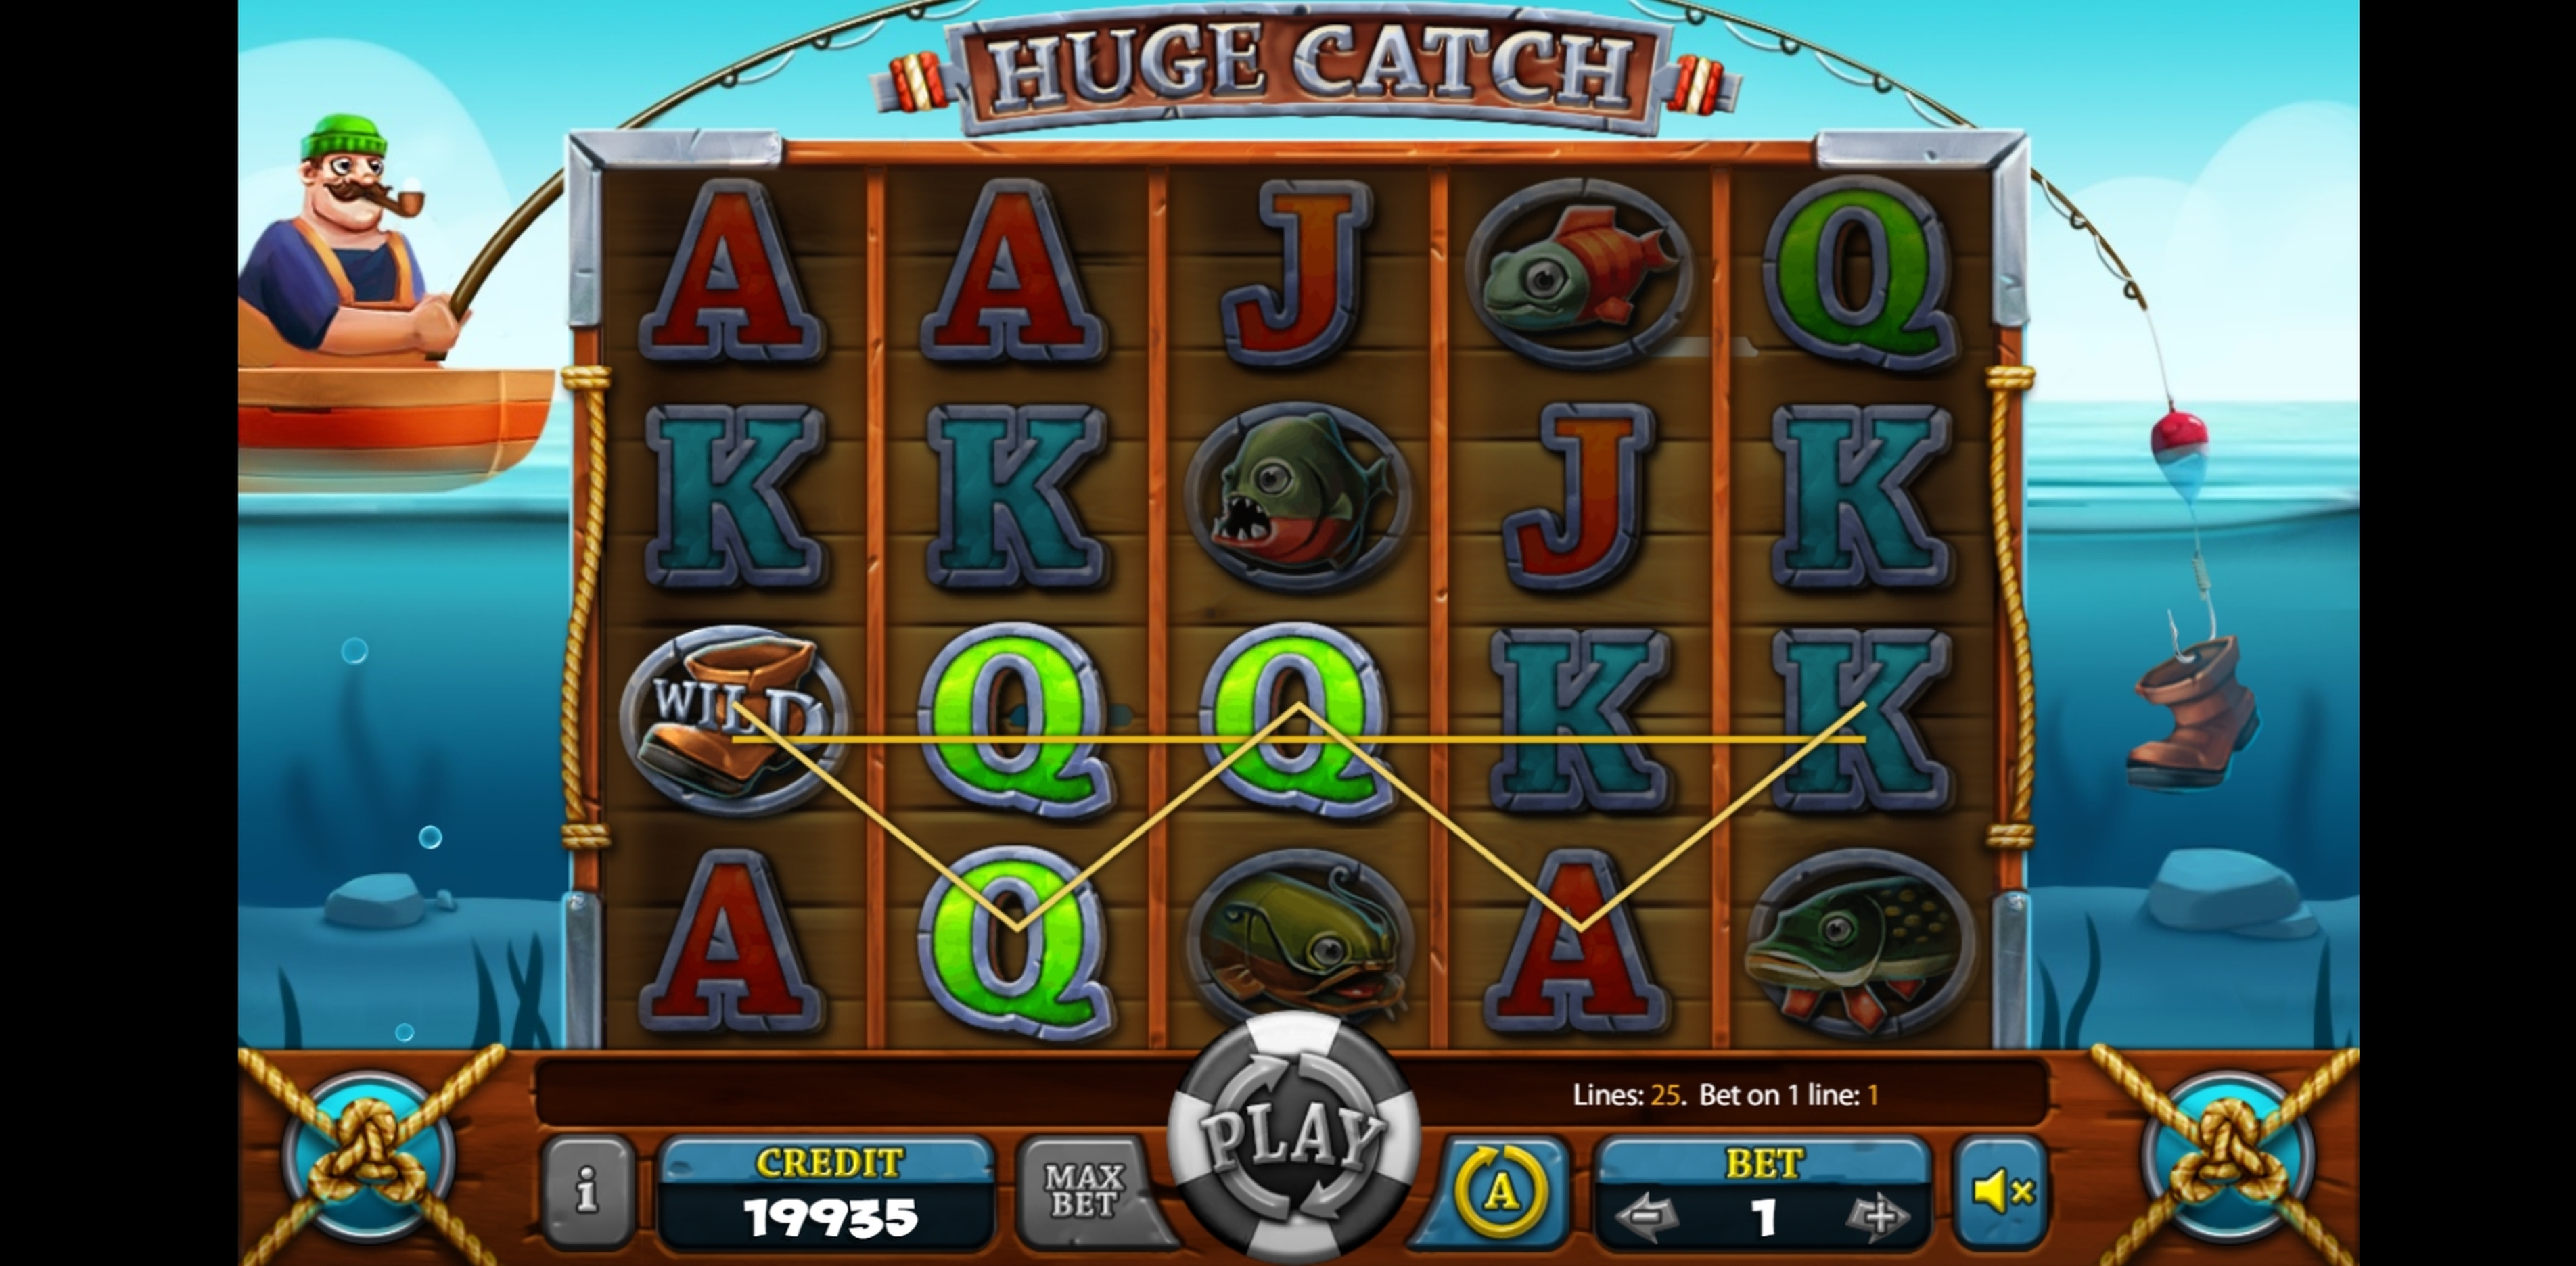 Win Money in Huge Catch Free Slot Game by X Card